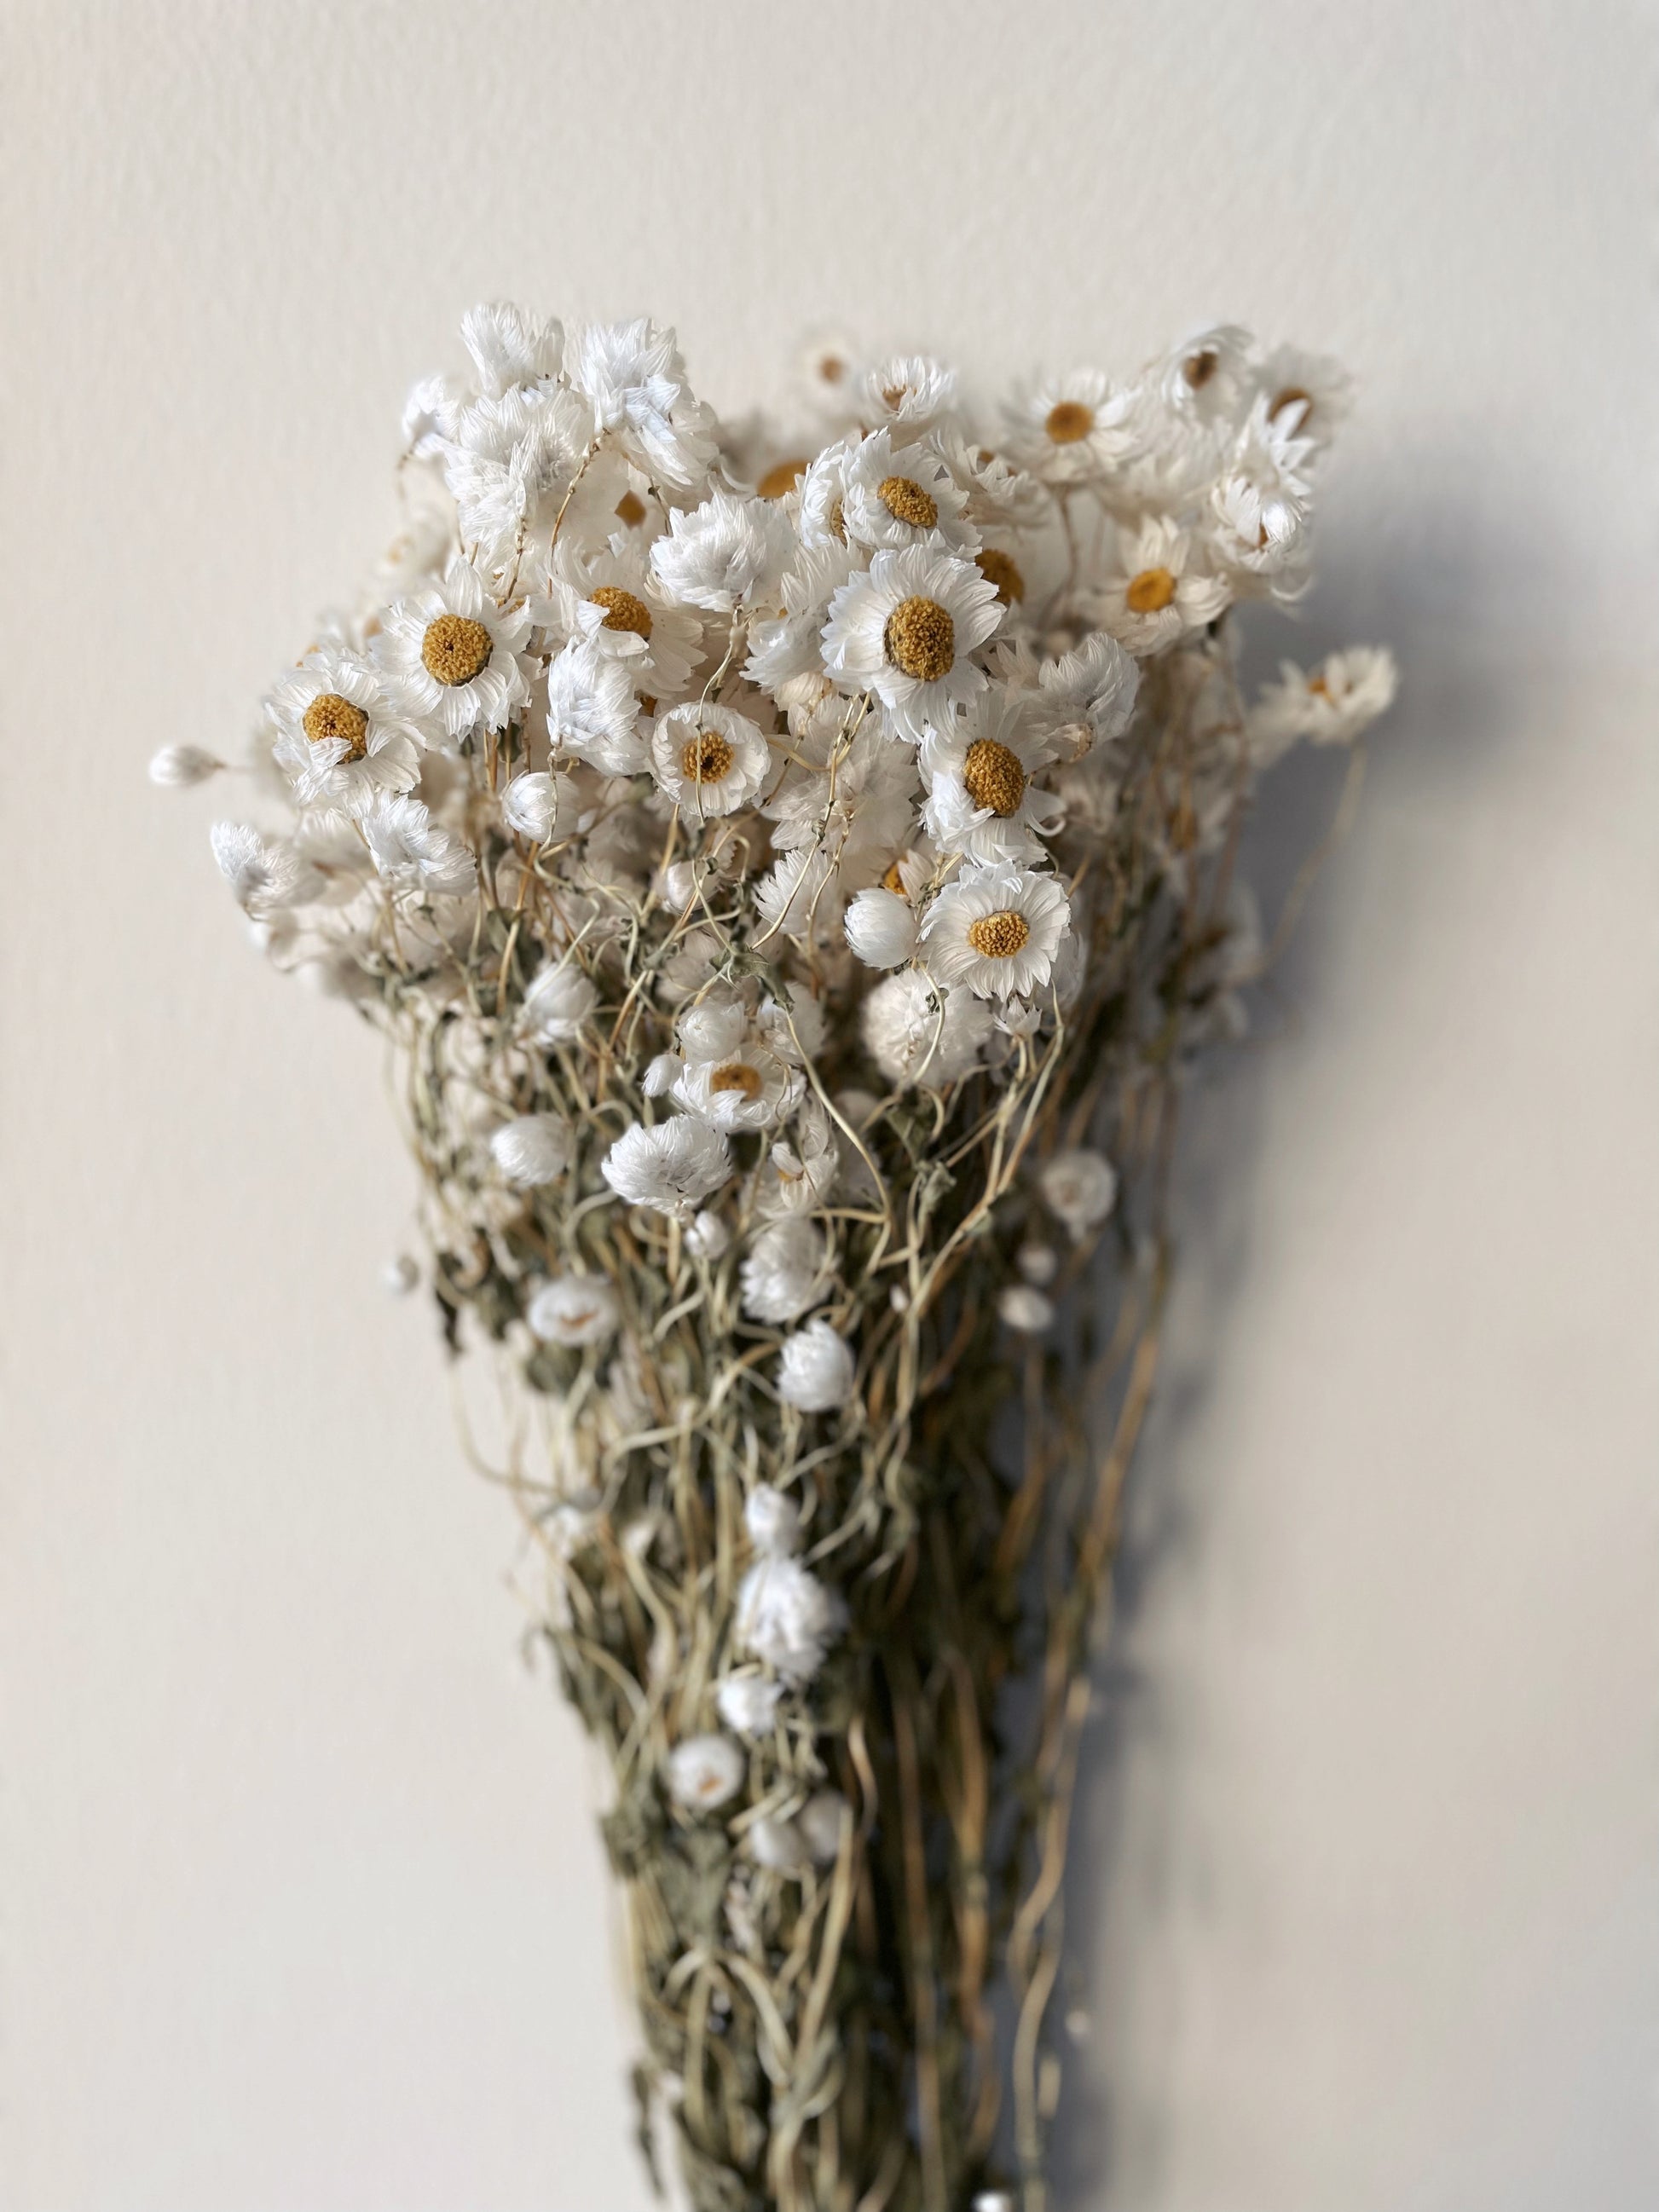 Daisy Dried Flowers, Natural Dry Flower